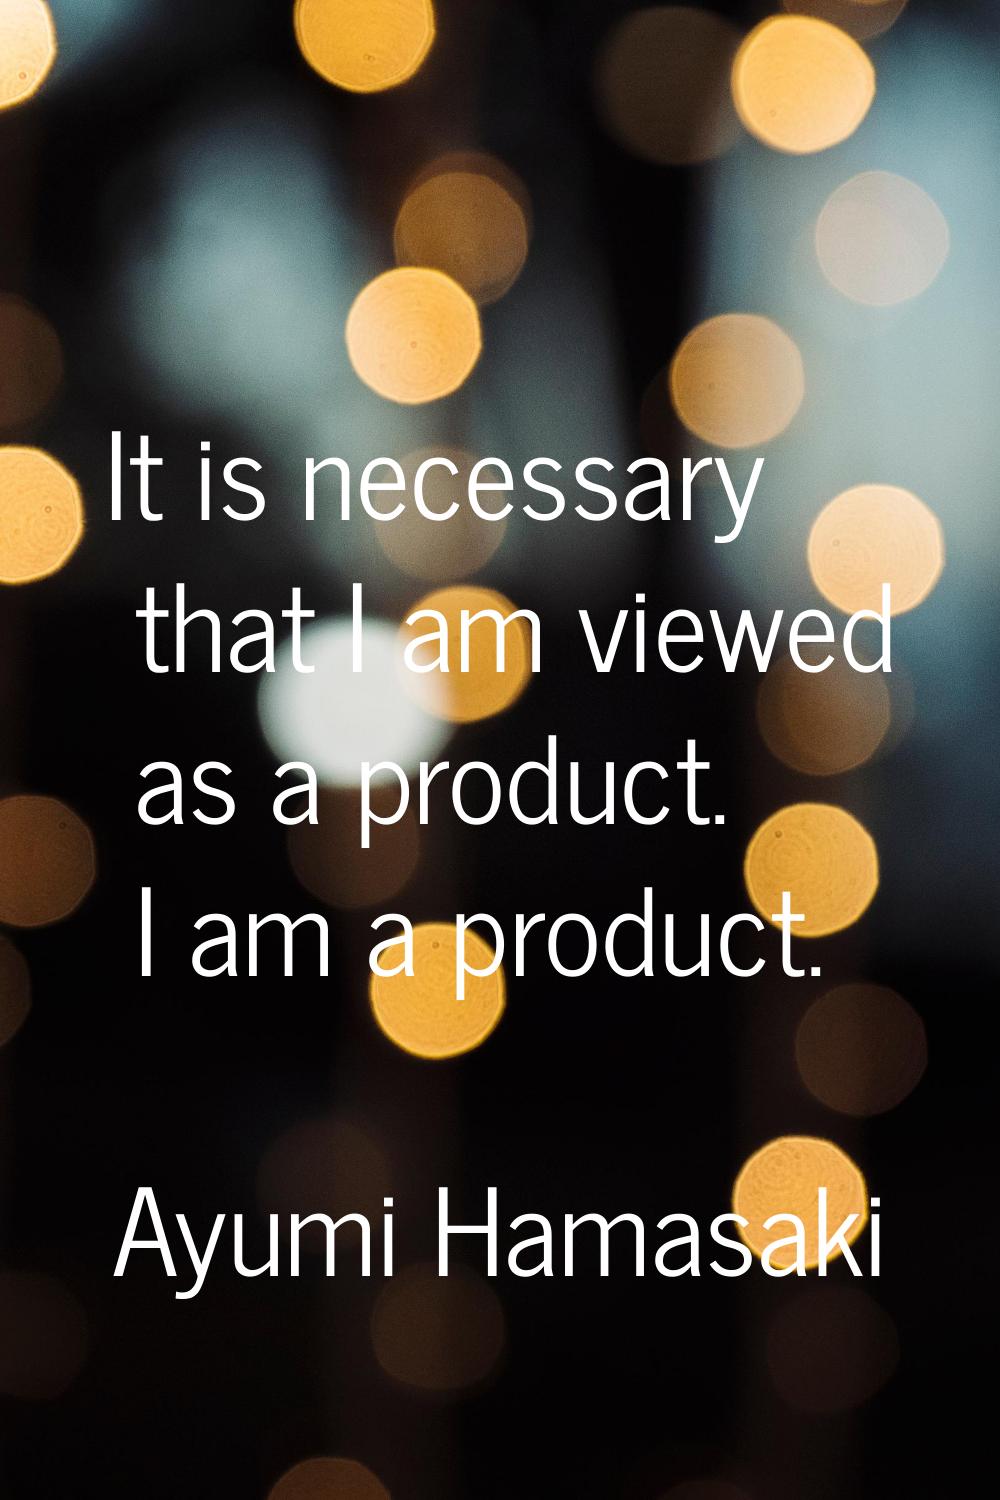 It is necessary that I am viewed as a product. I am a product.